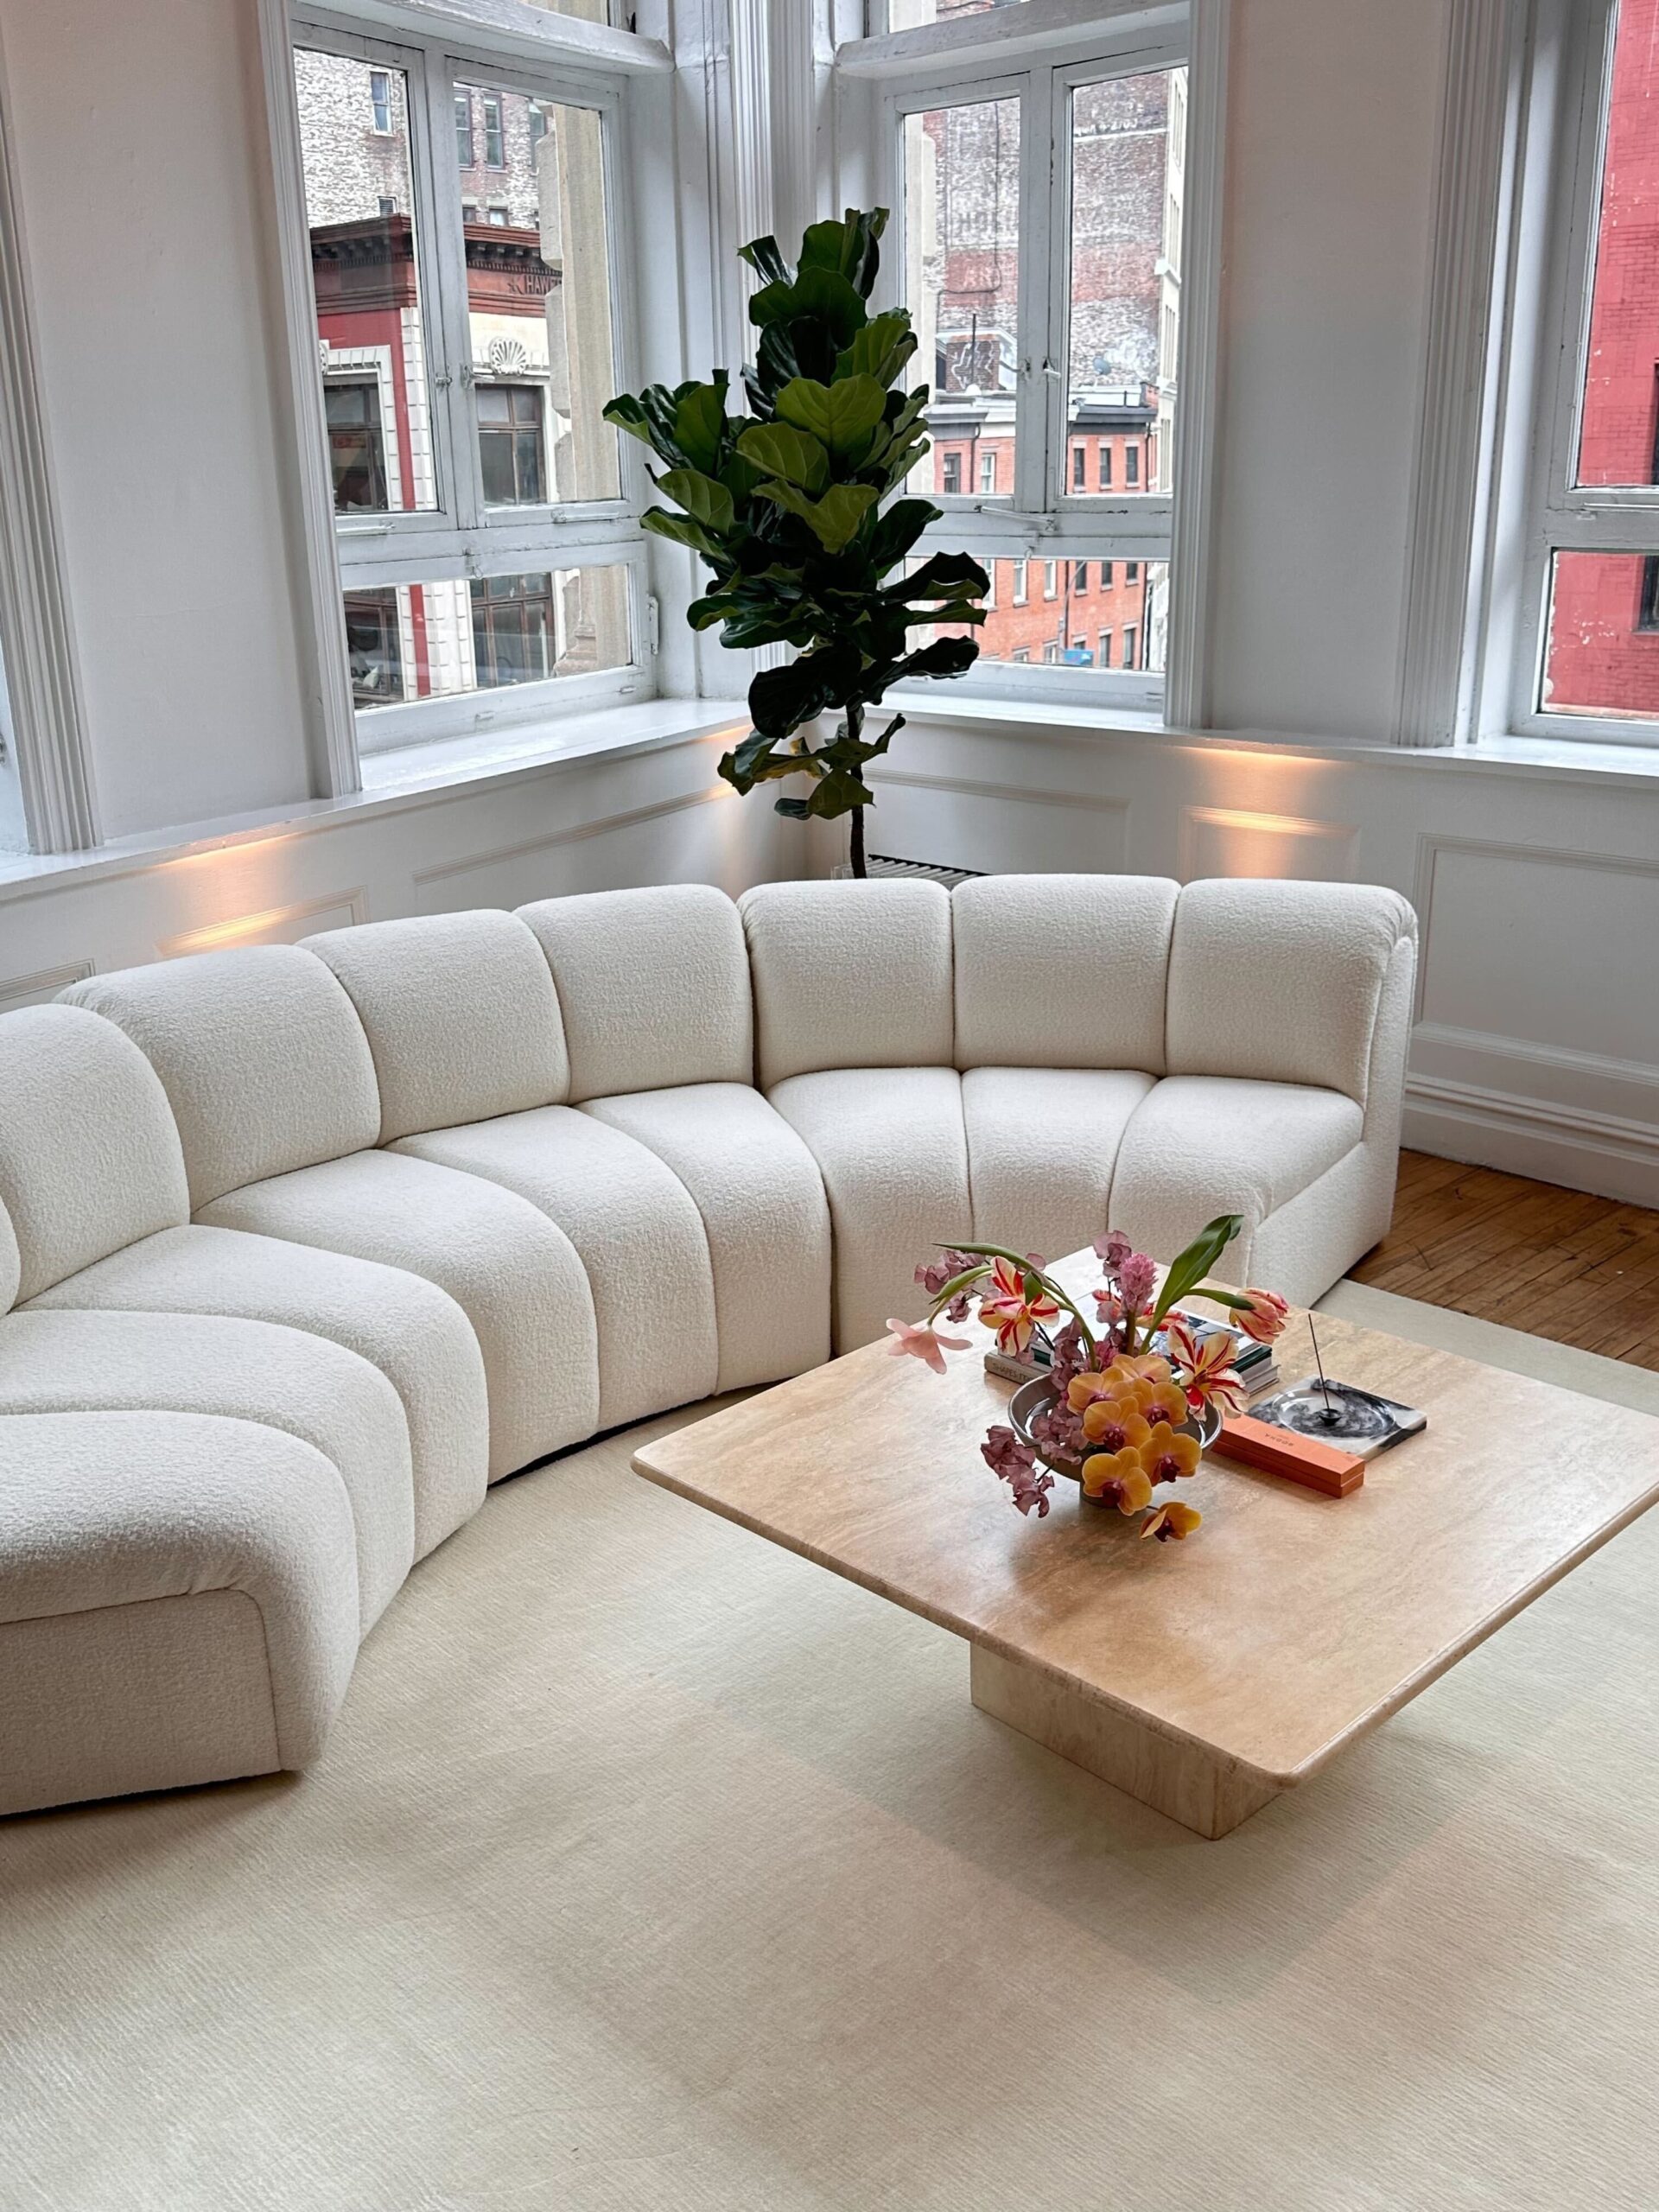 How to increase the beauty of your home
with curved sectional sofa